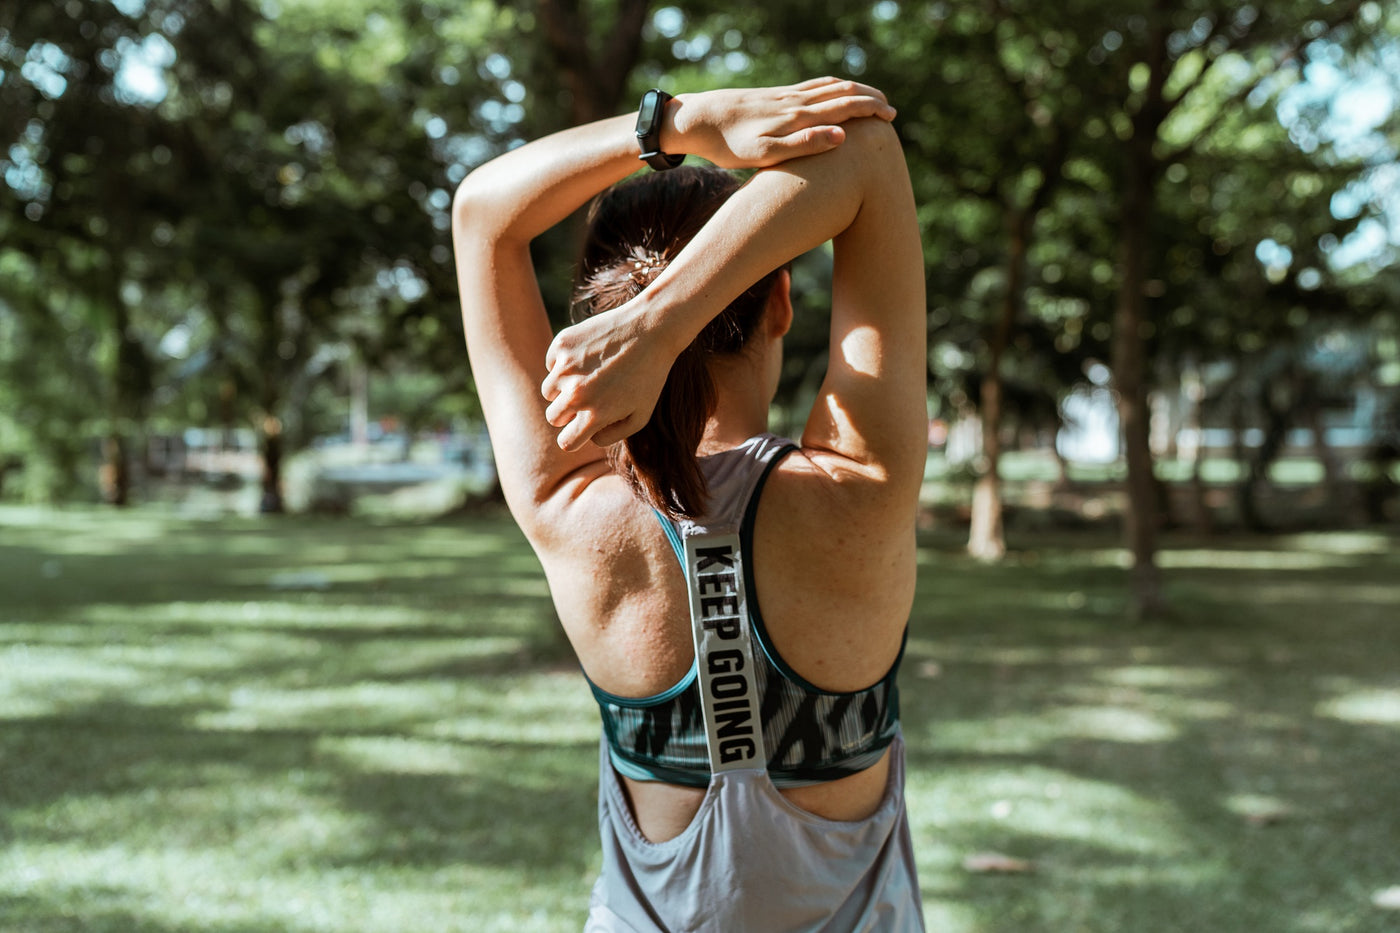 Woman in the park wearing athletic gear and stretching her triceps. The shot focuses on her back and shoulders.